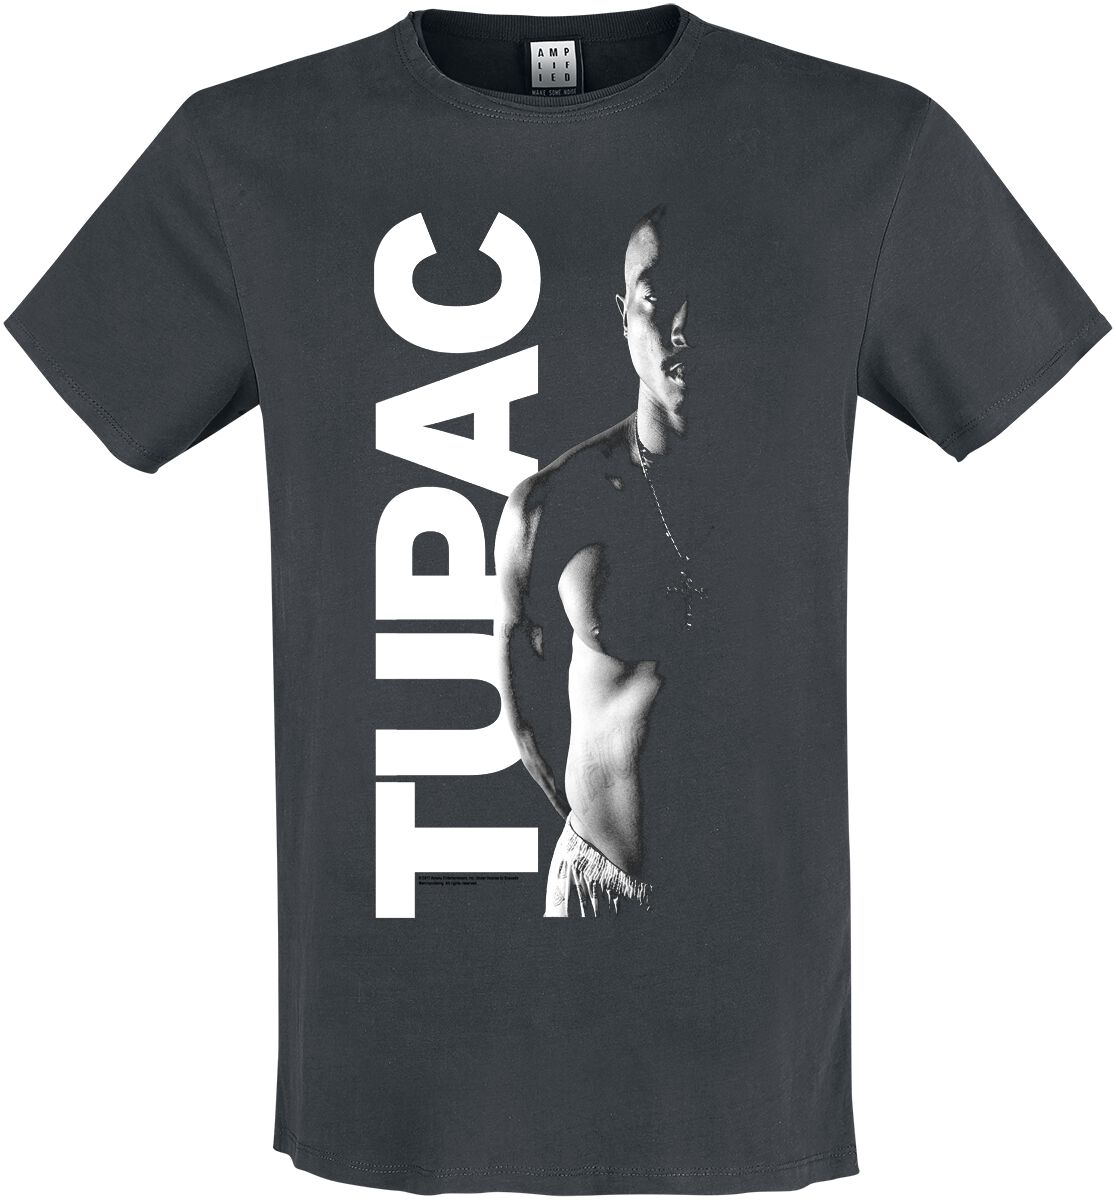 Tupac Shakur Amplified Collection - Shakur T-Shirt charcoal in XL